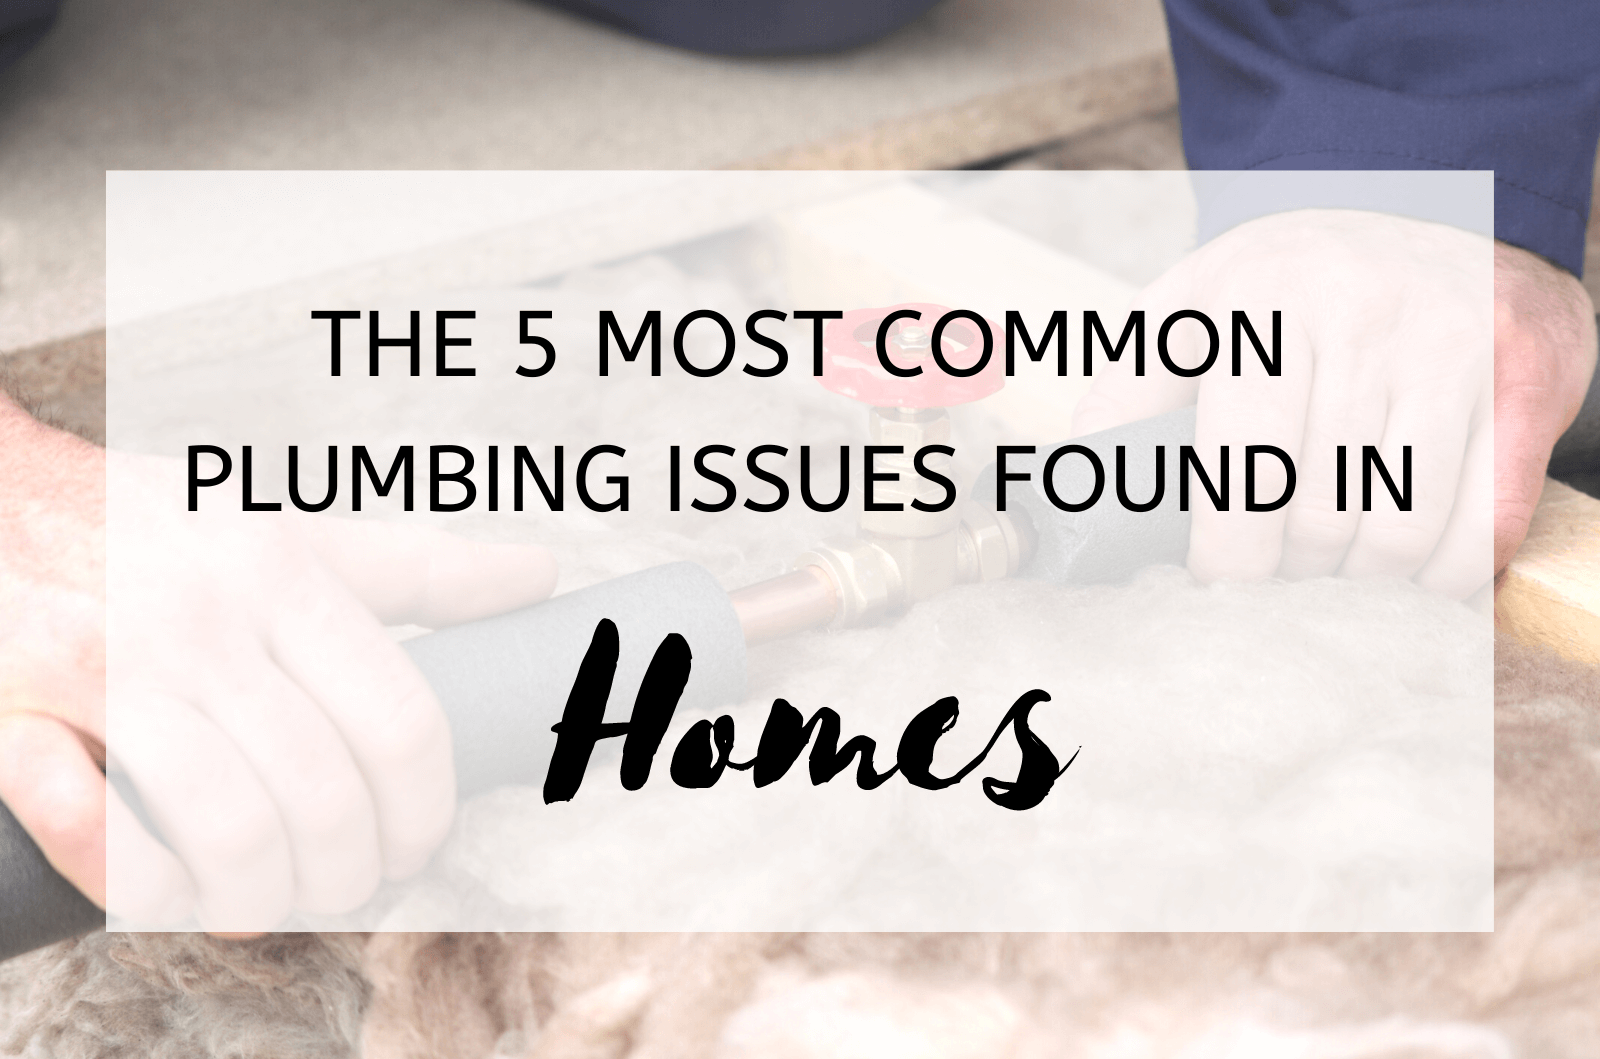 The 5 Most Common Plumbing Issues Found In Homes